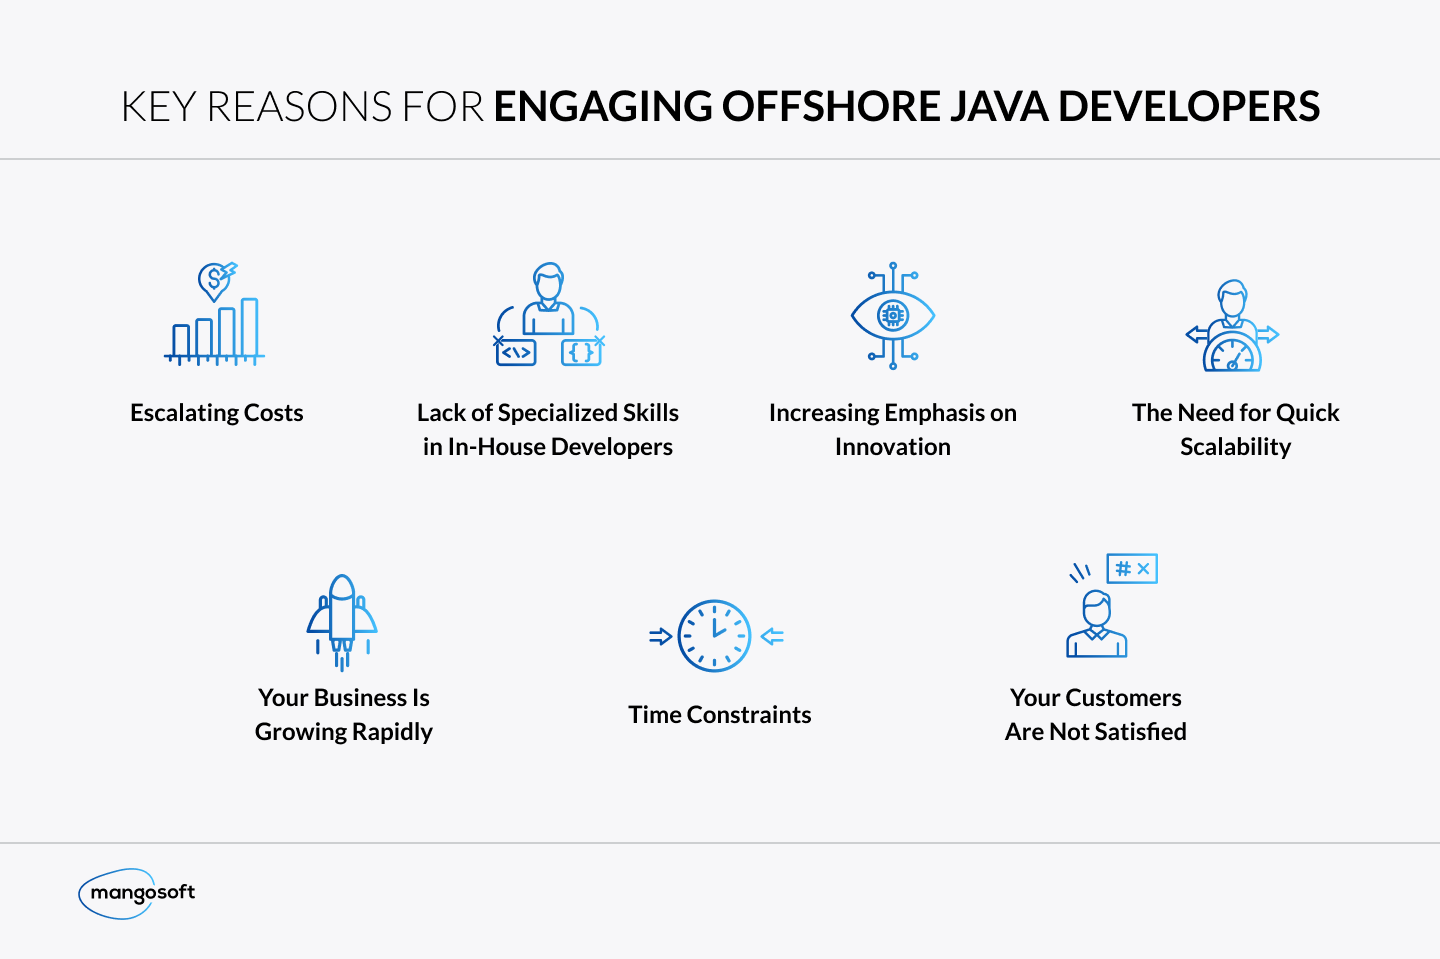 7 Signs You Should Offshore Your Java Development - 1